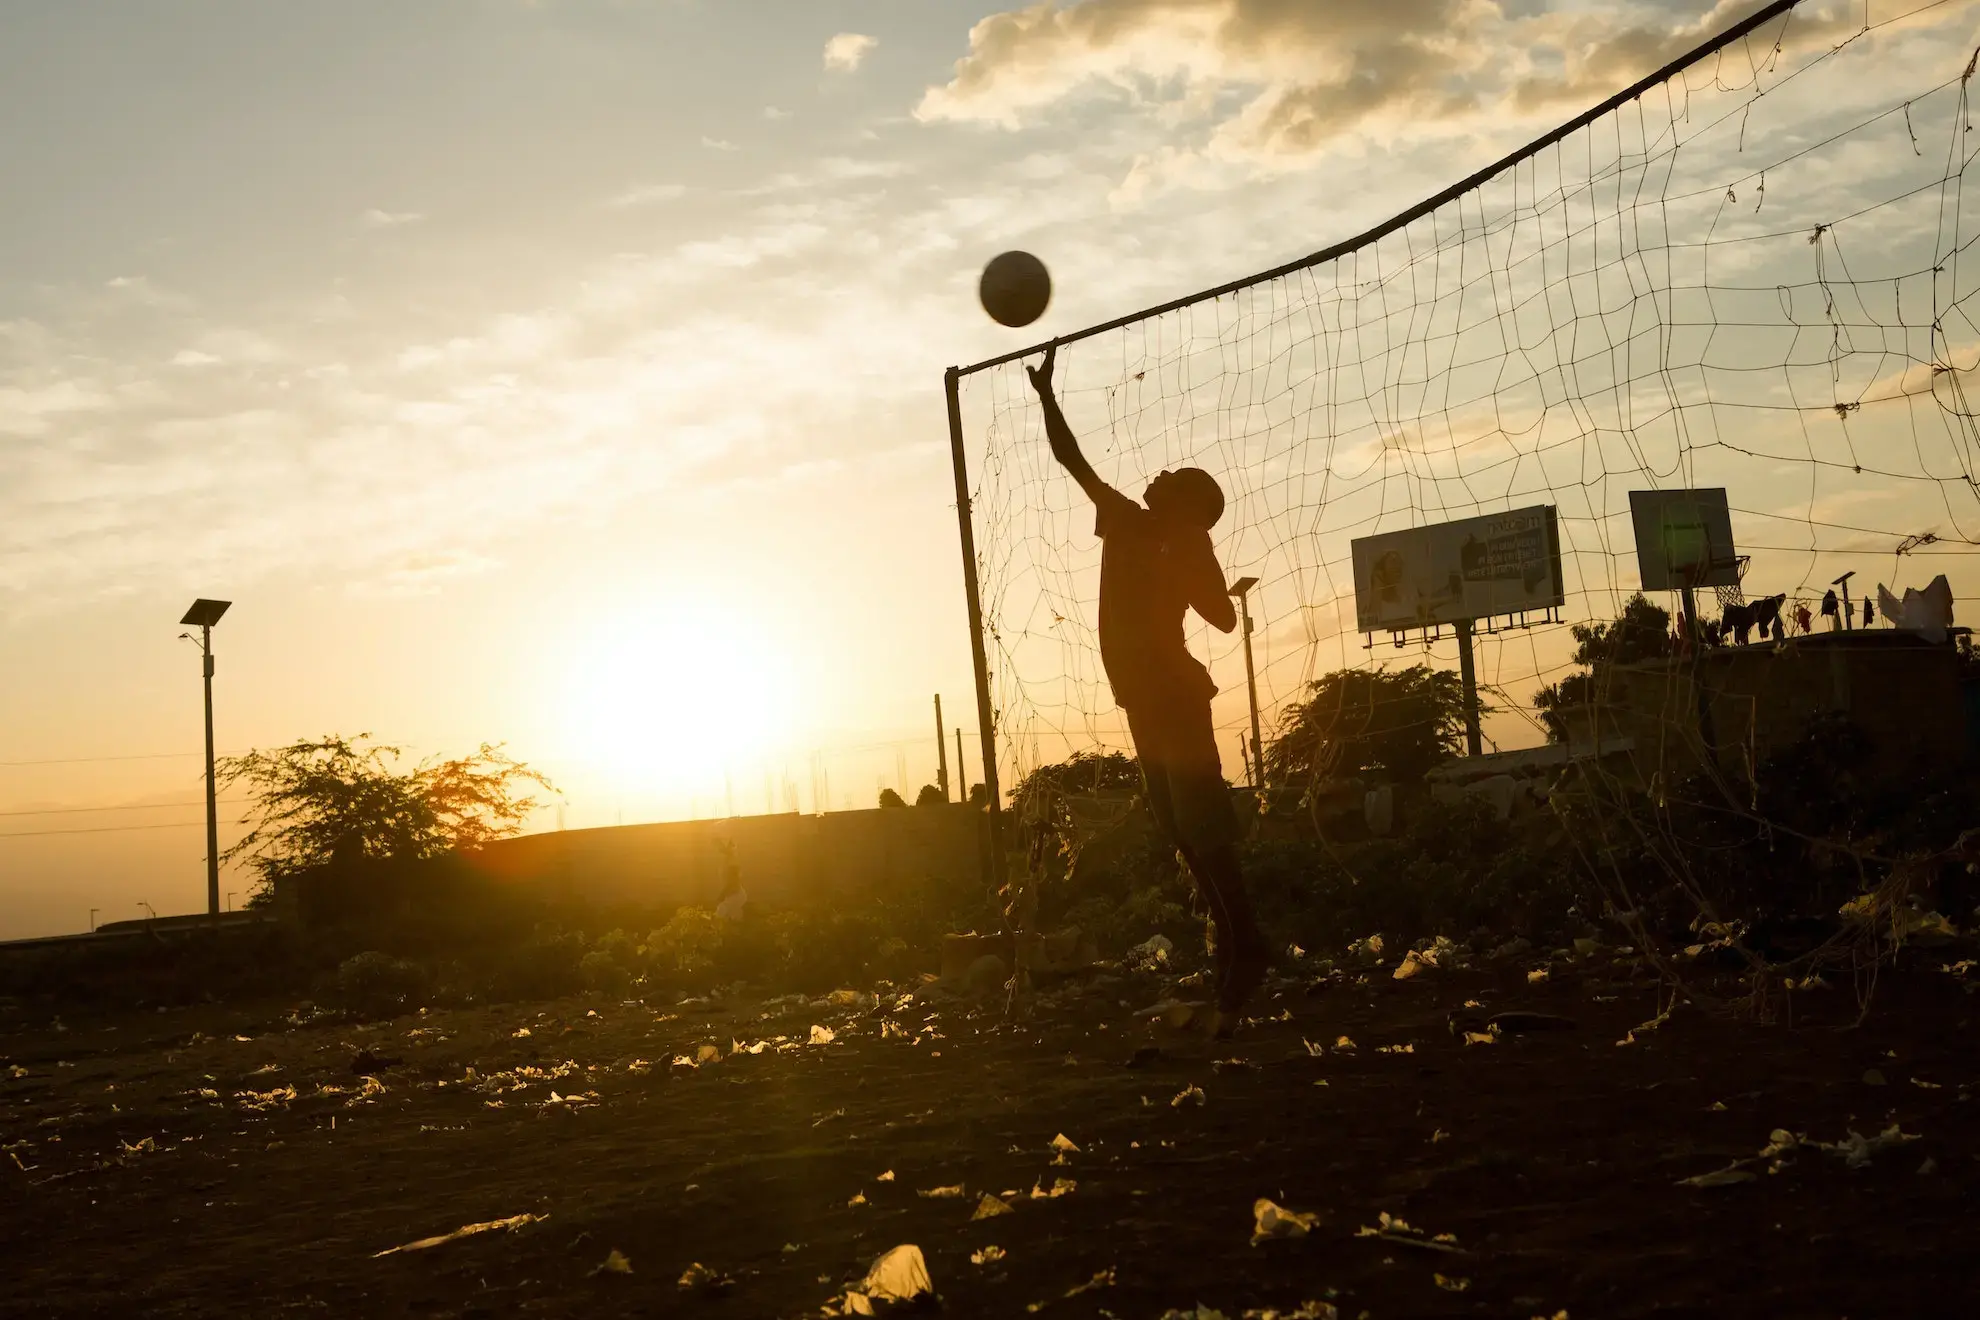 sillouette of a kid reaching for a ball in front of a net at sunset